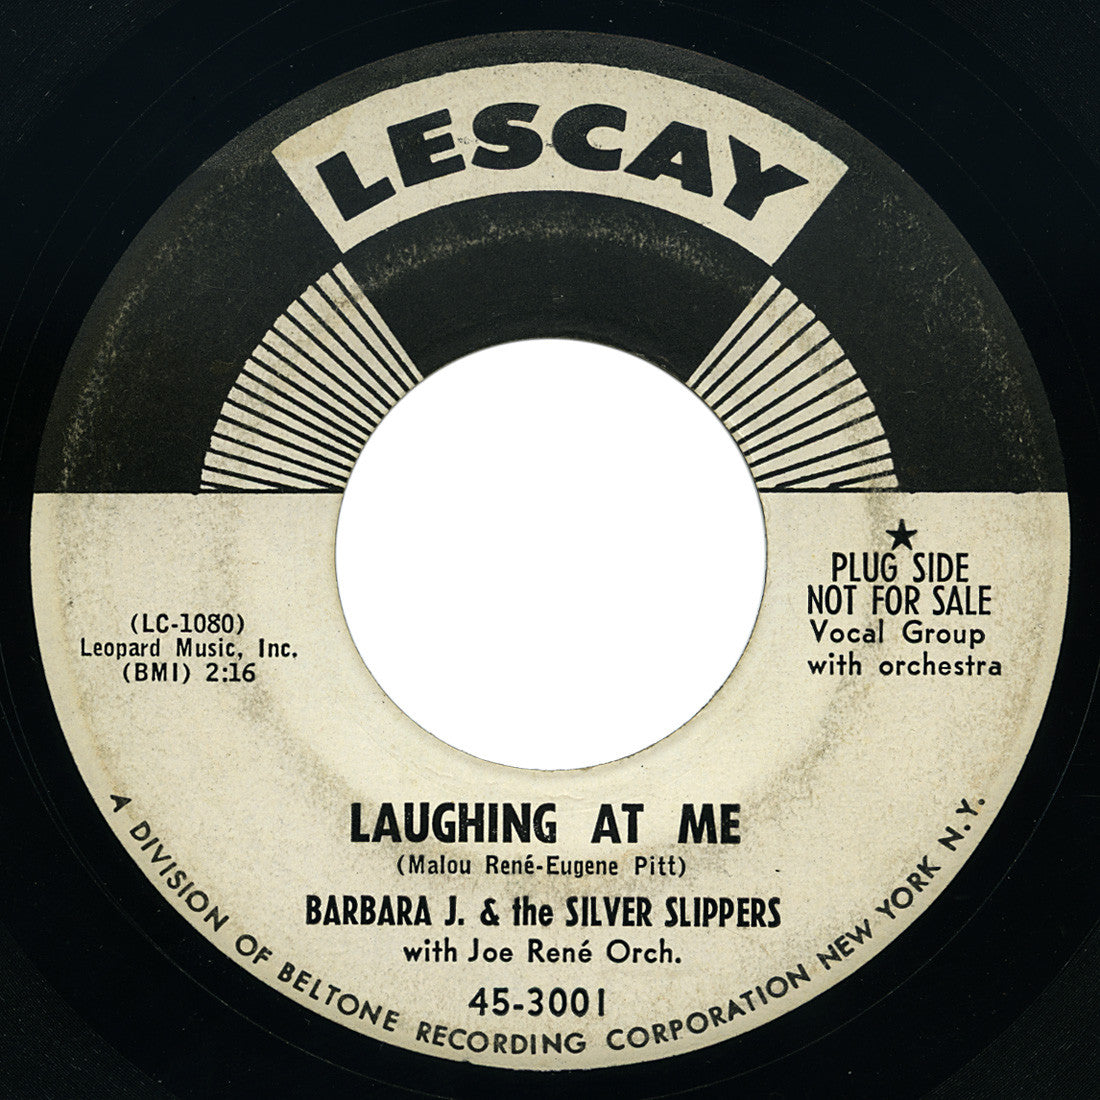 Barbara J. & The Silver Slippers – Laughing At Me – Lescay